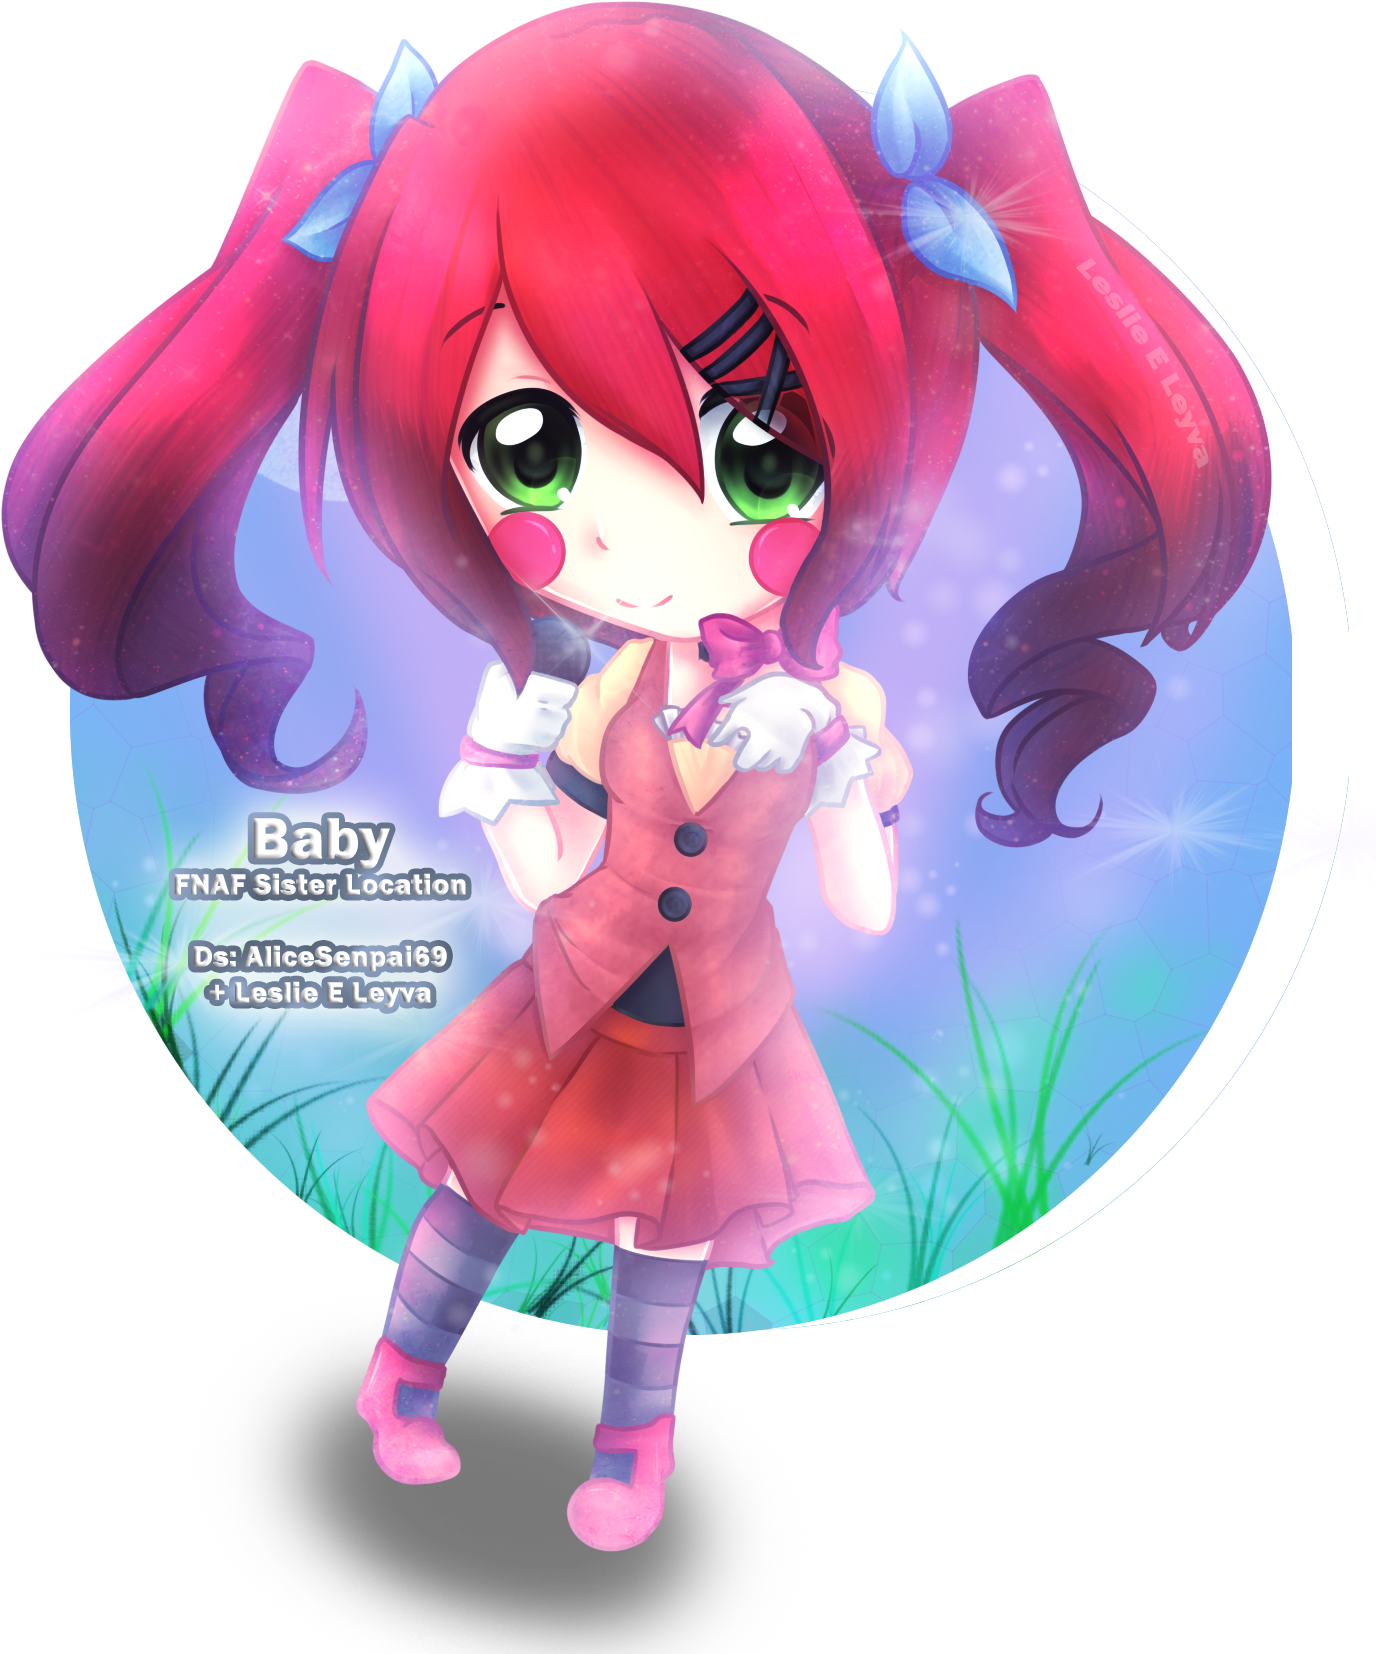 F Naf Sister Location Baby Anime Pictures To Pin On - Fnaf Sister Location Anime (1440x1704)